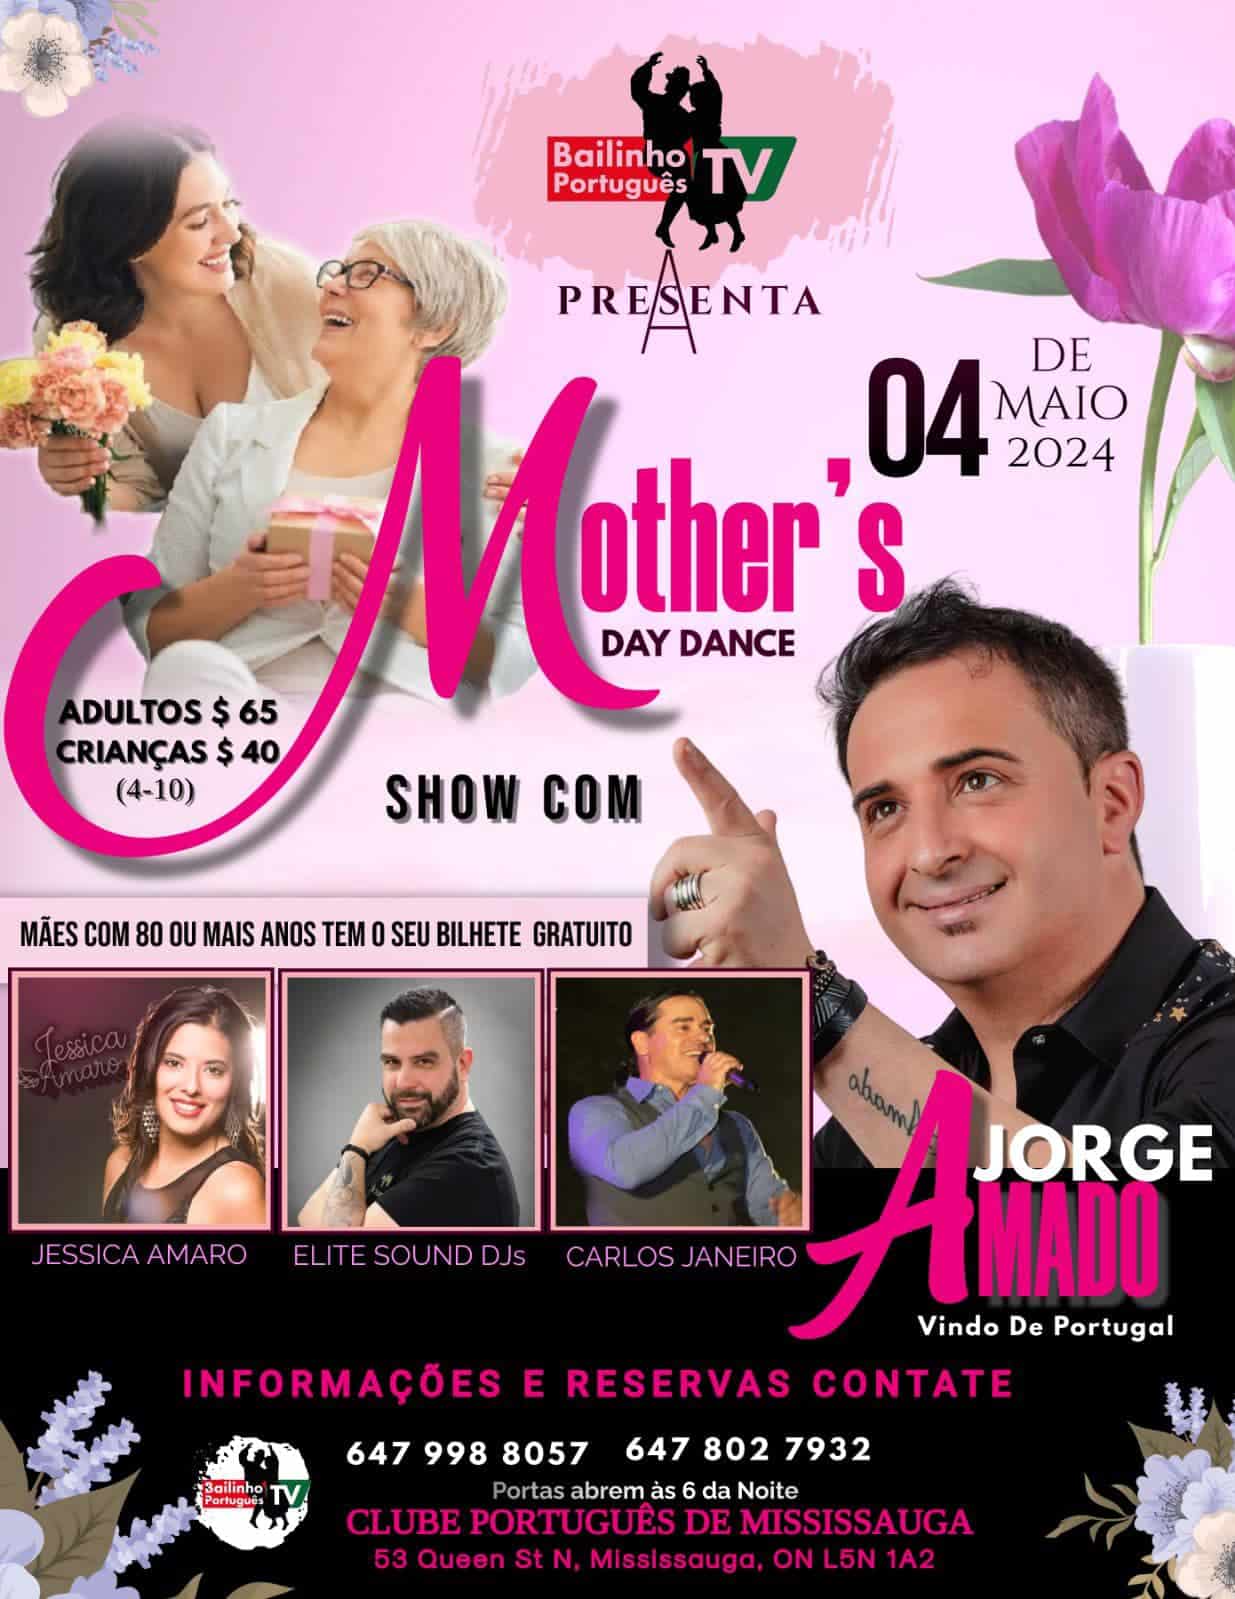 Poster for Mother’s Day Dance event by Bailinho Português TV featuring Jorge Amado and other artists, on May 4, 2024, at Clube Português de Mississauga.